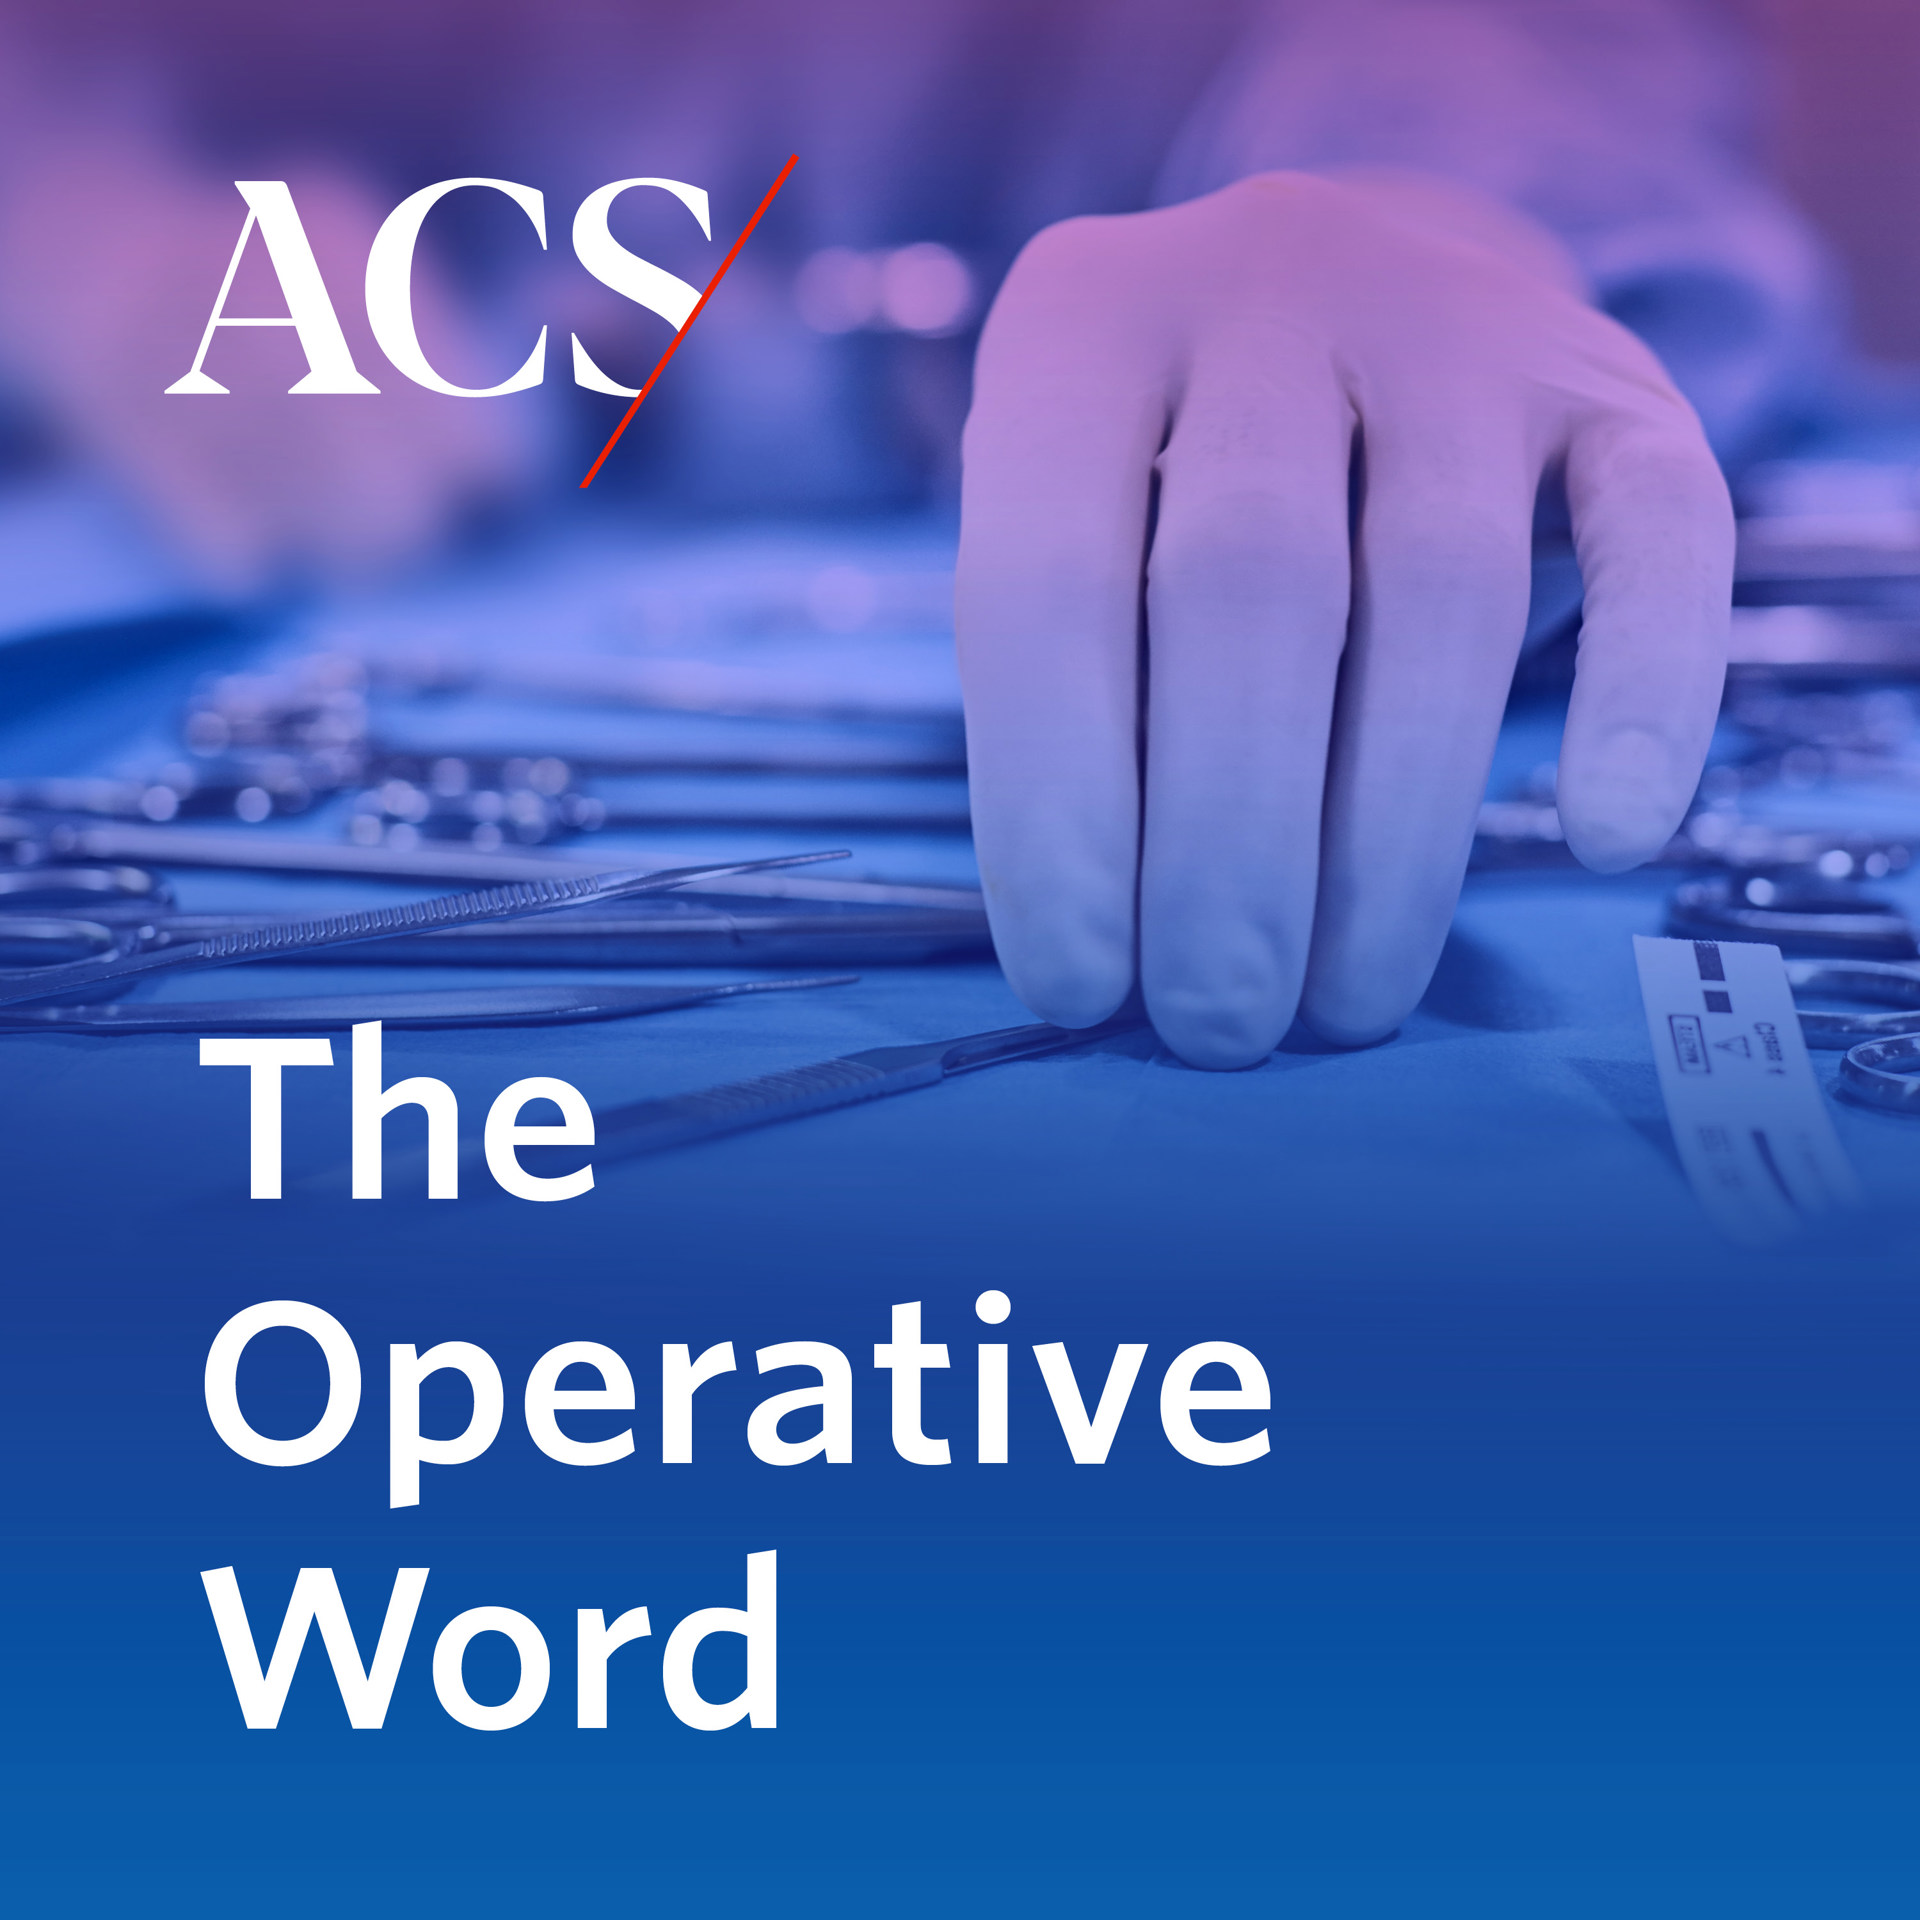 Diverticulitis Familiality Is Examined in Latest The Operative Word